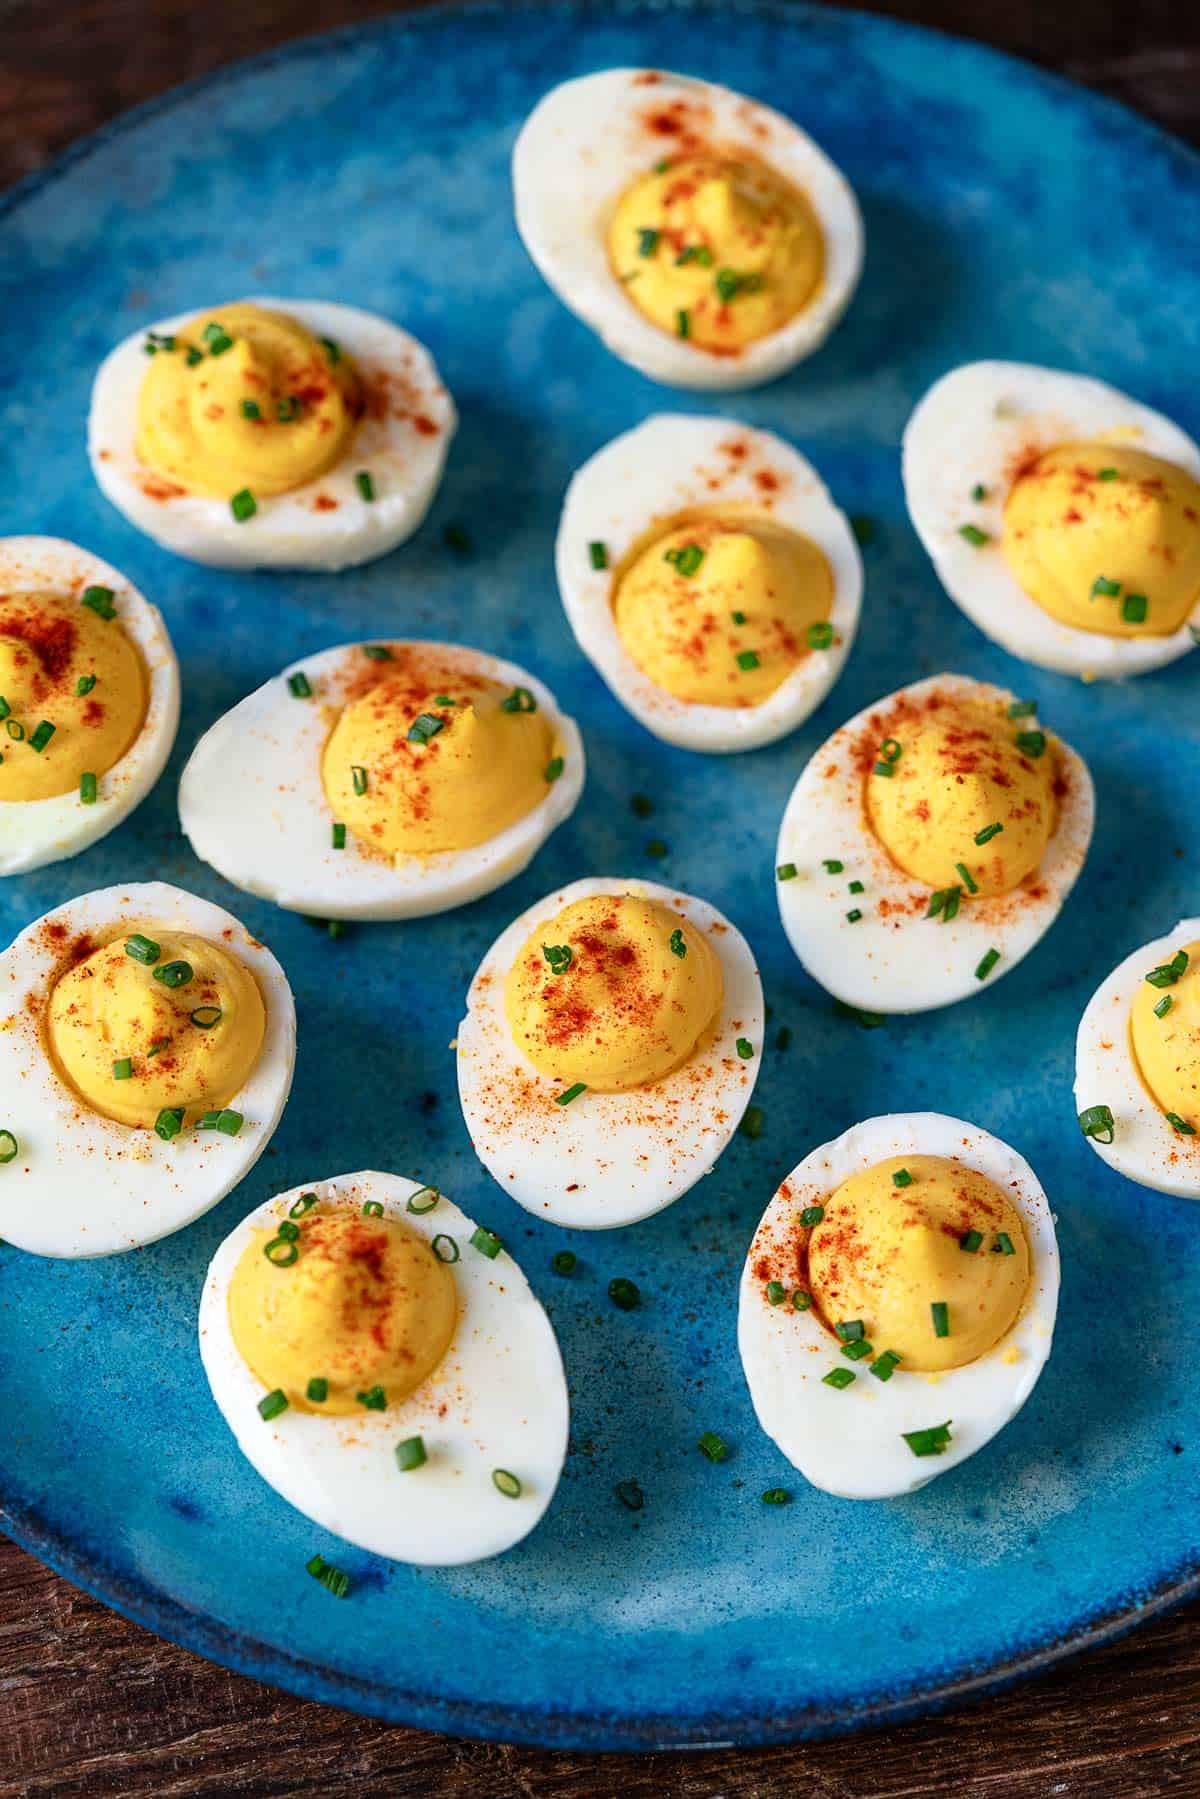 12 deviled eggs on a plate topped with paprika and chives.